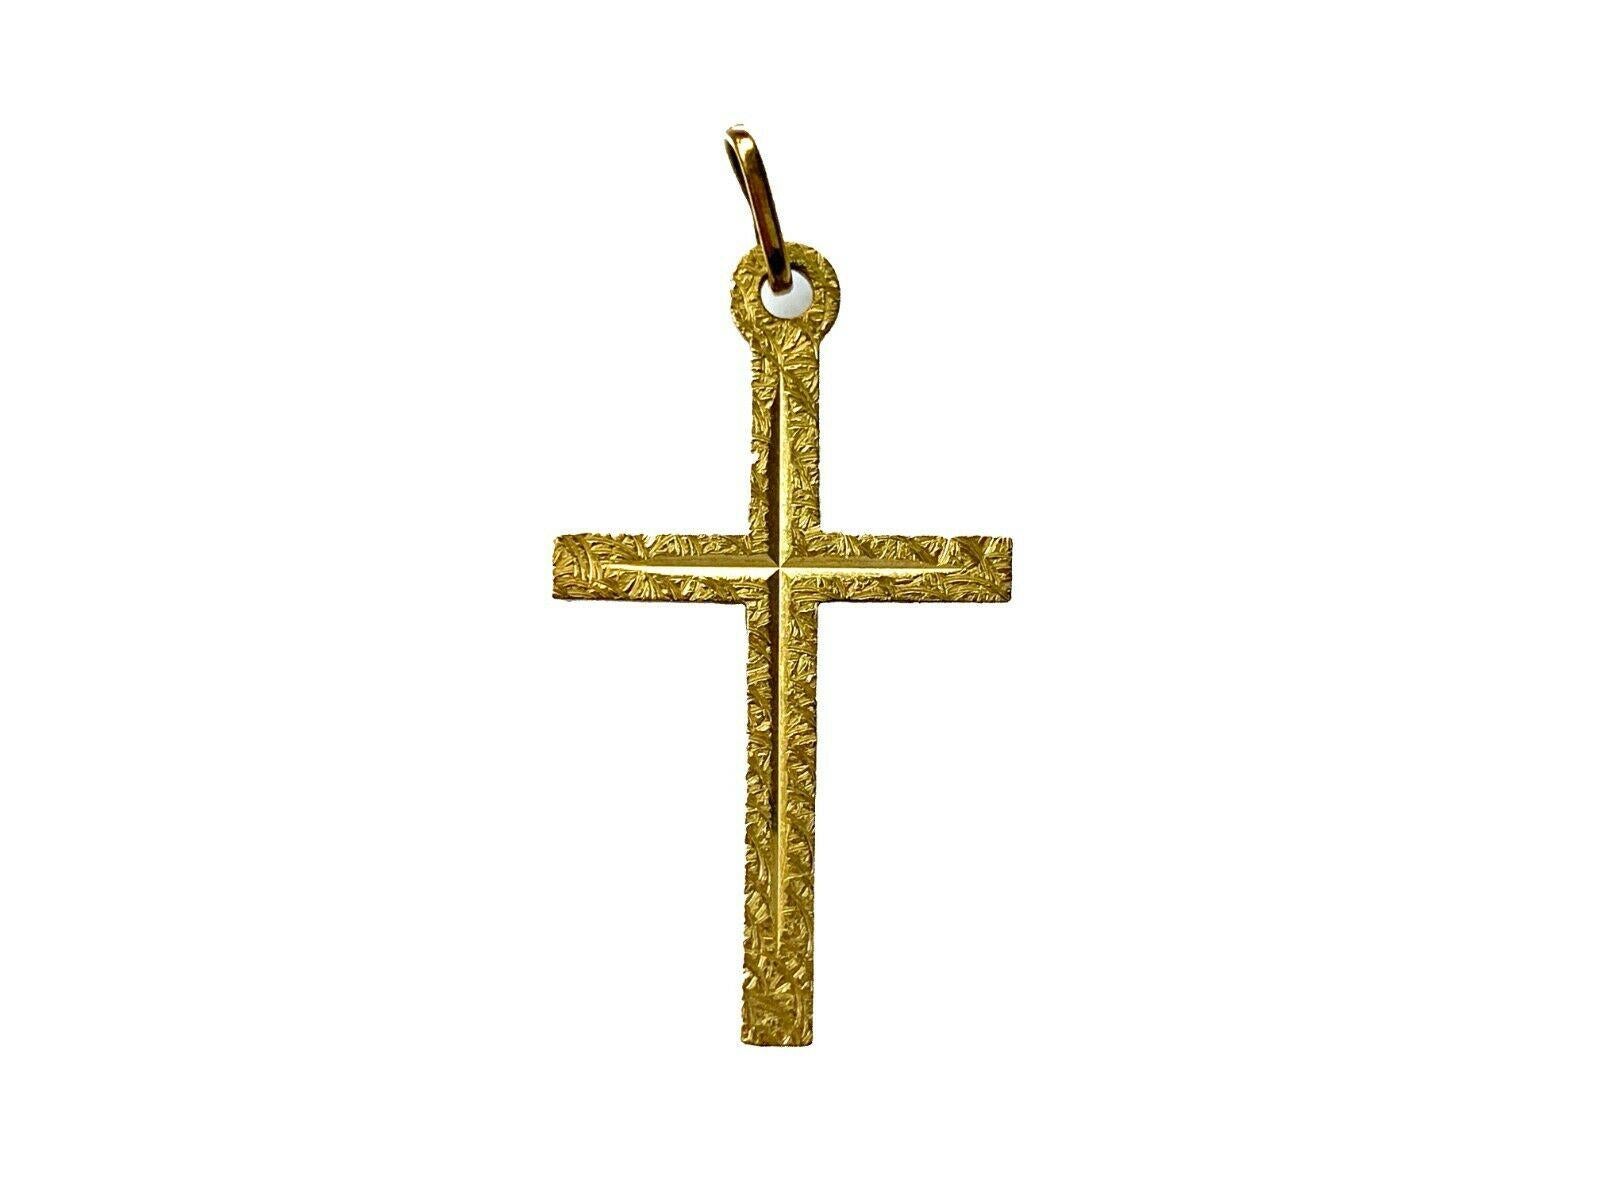 9ct Gold Cross 
With beautiful textural surface engraved design applied 
Era 1970s
Weight 0.73 gramme
Stamped 375 on Closed Bail.